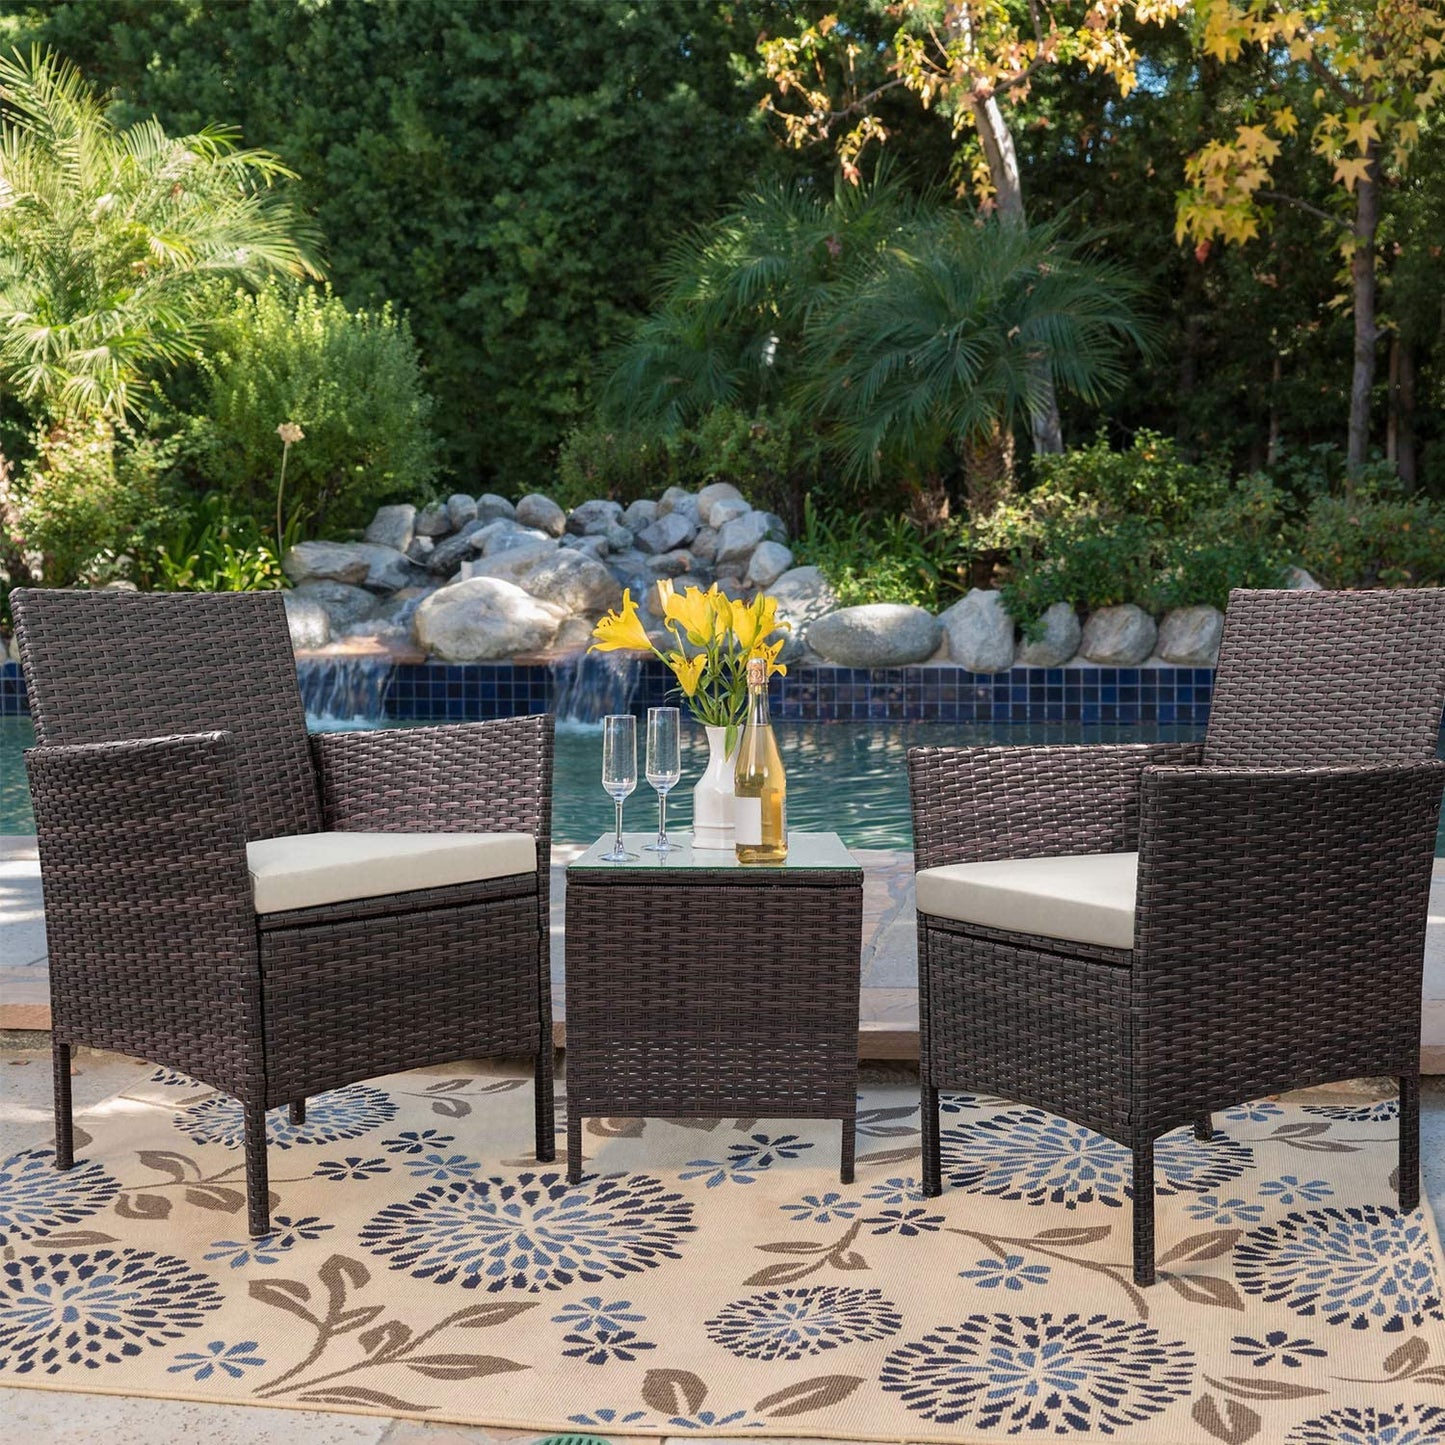 Patio Watcher Patio Porch Furniture Sets 3 Pieces PE Rattan Wicker Chairs with Table Outdoor Garden Furniture Sets